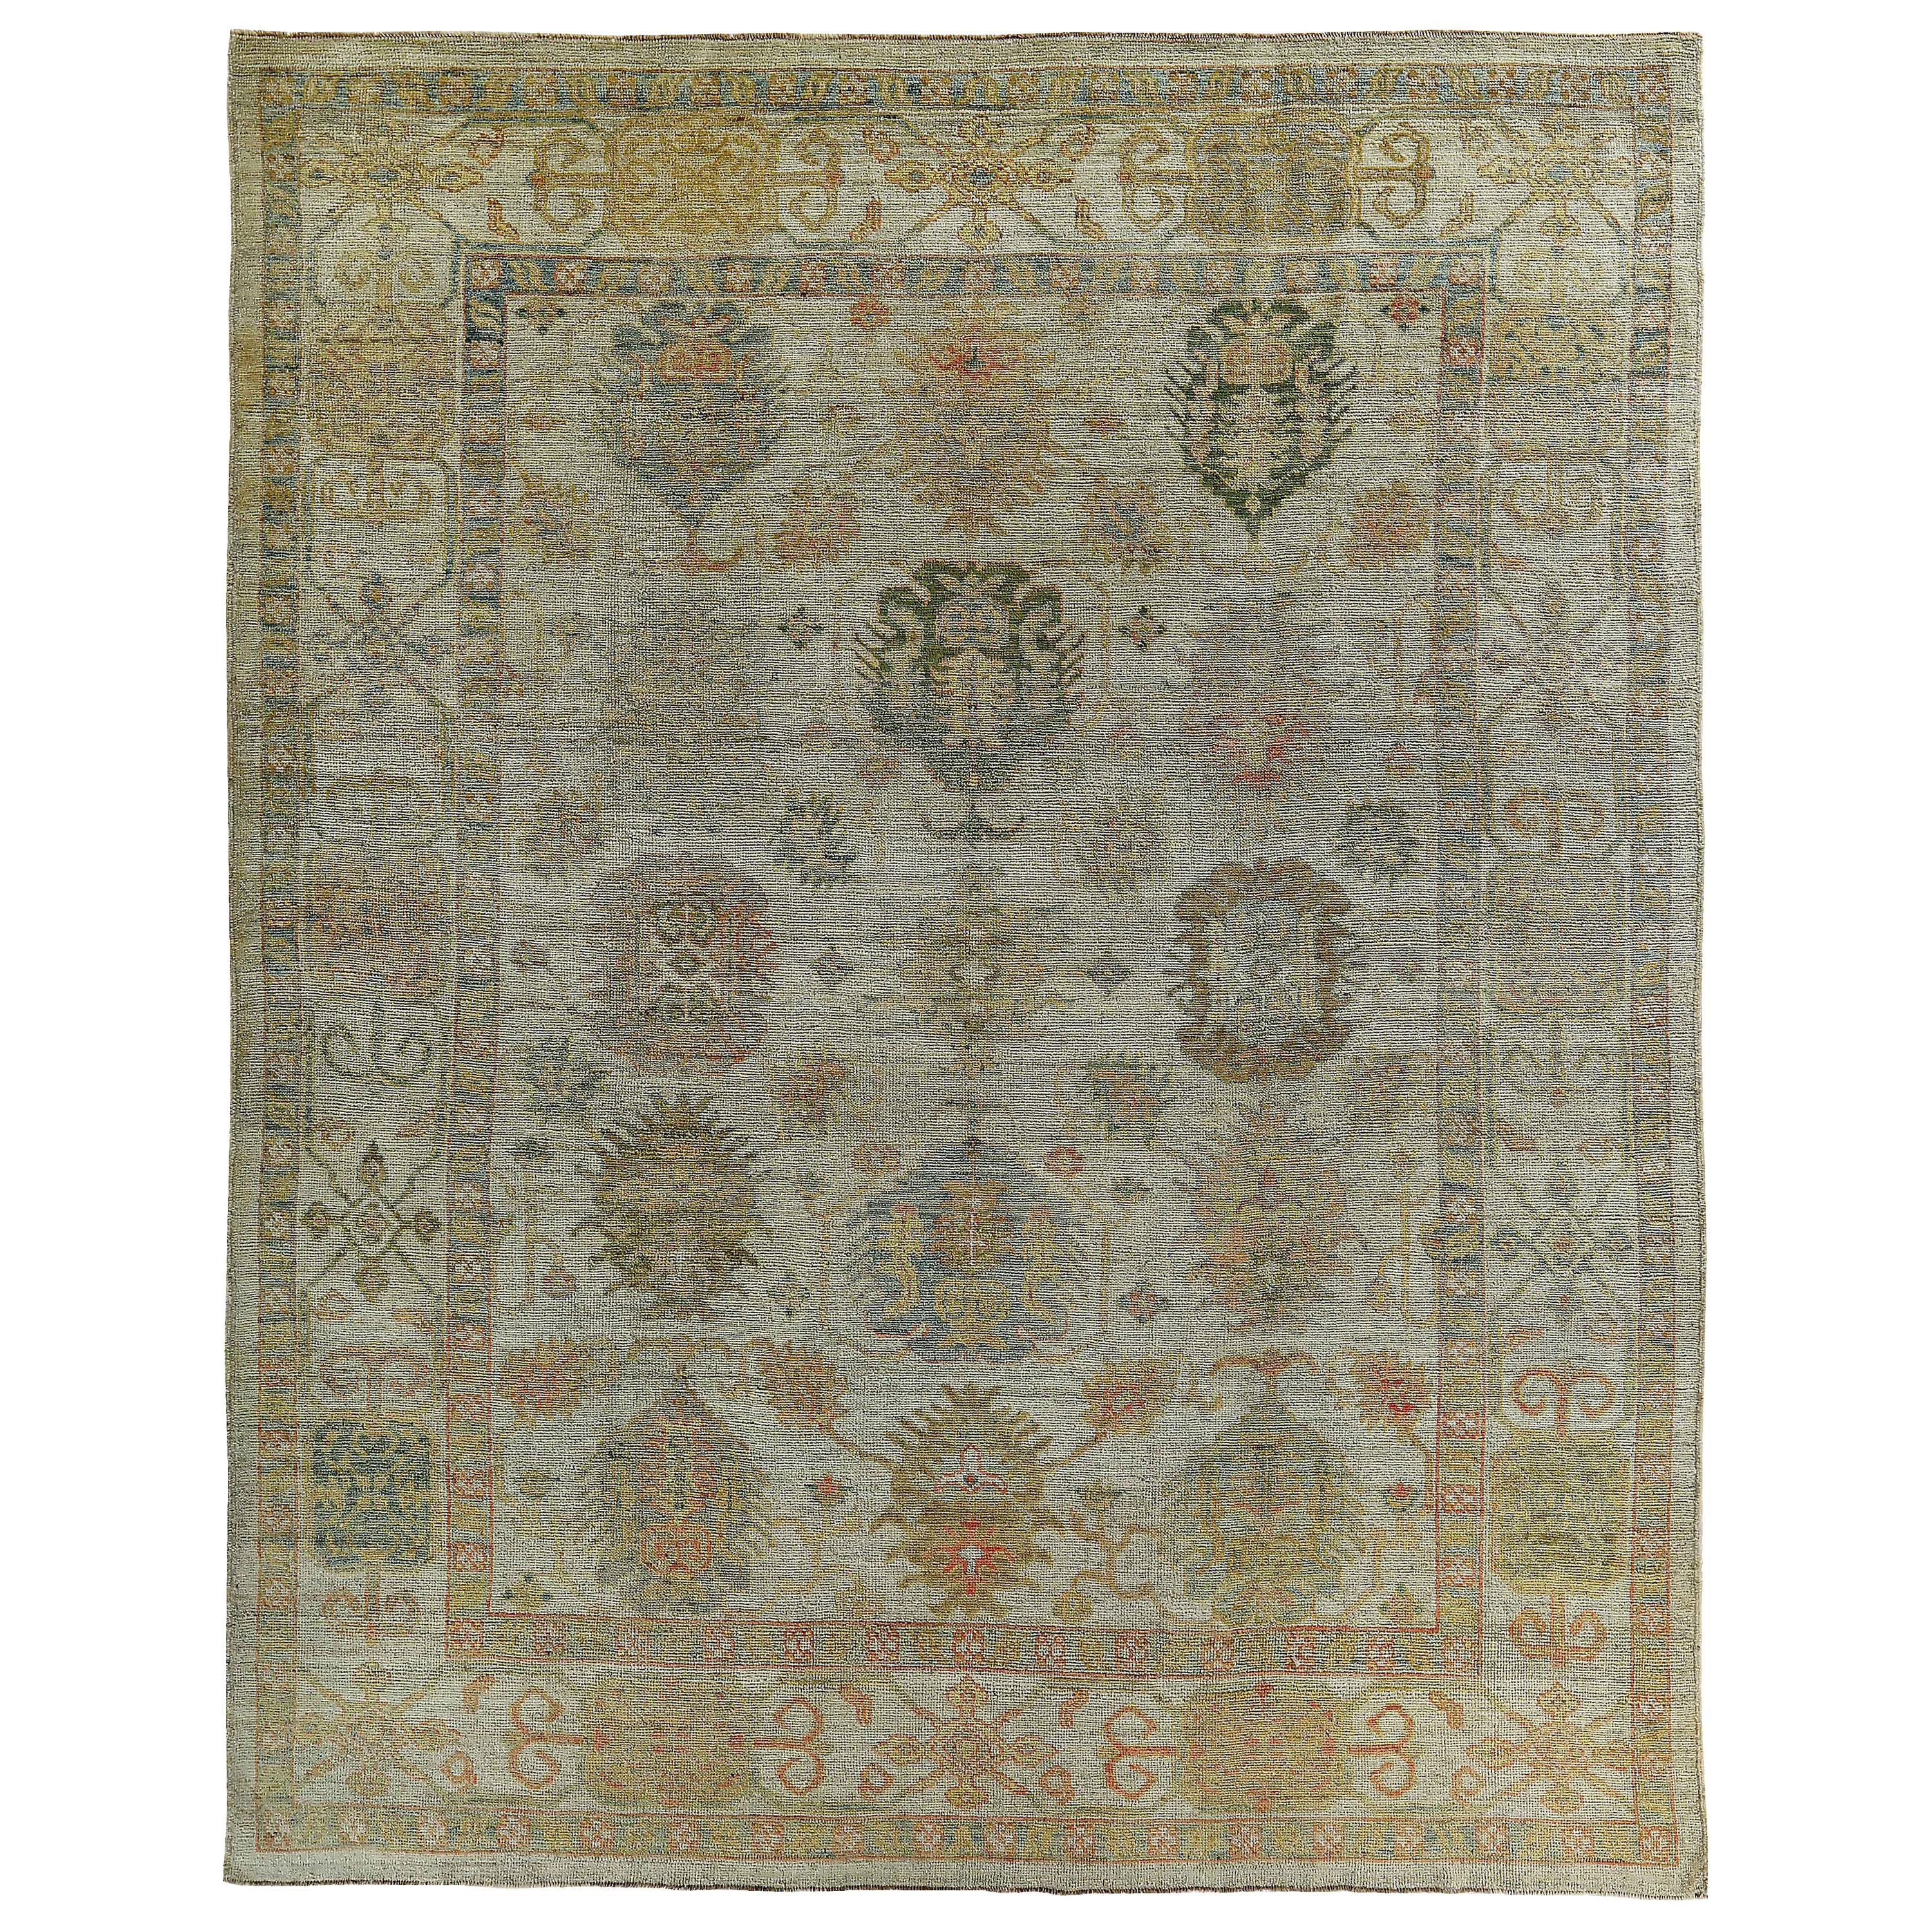 New Turkish Oushak Rug with Green and Gray Flower Head Details on Ivory Field For Sale